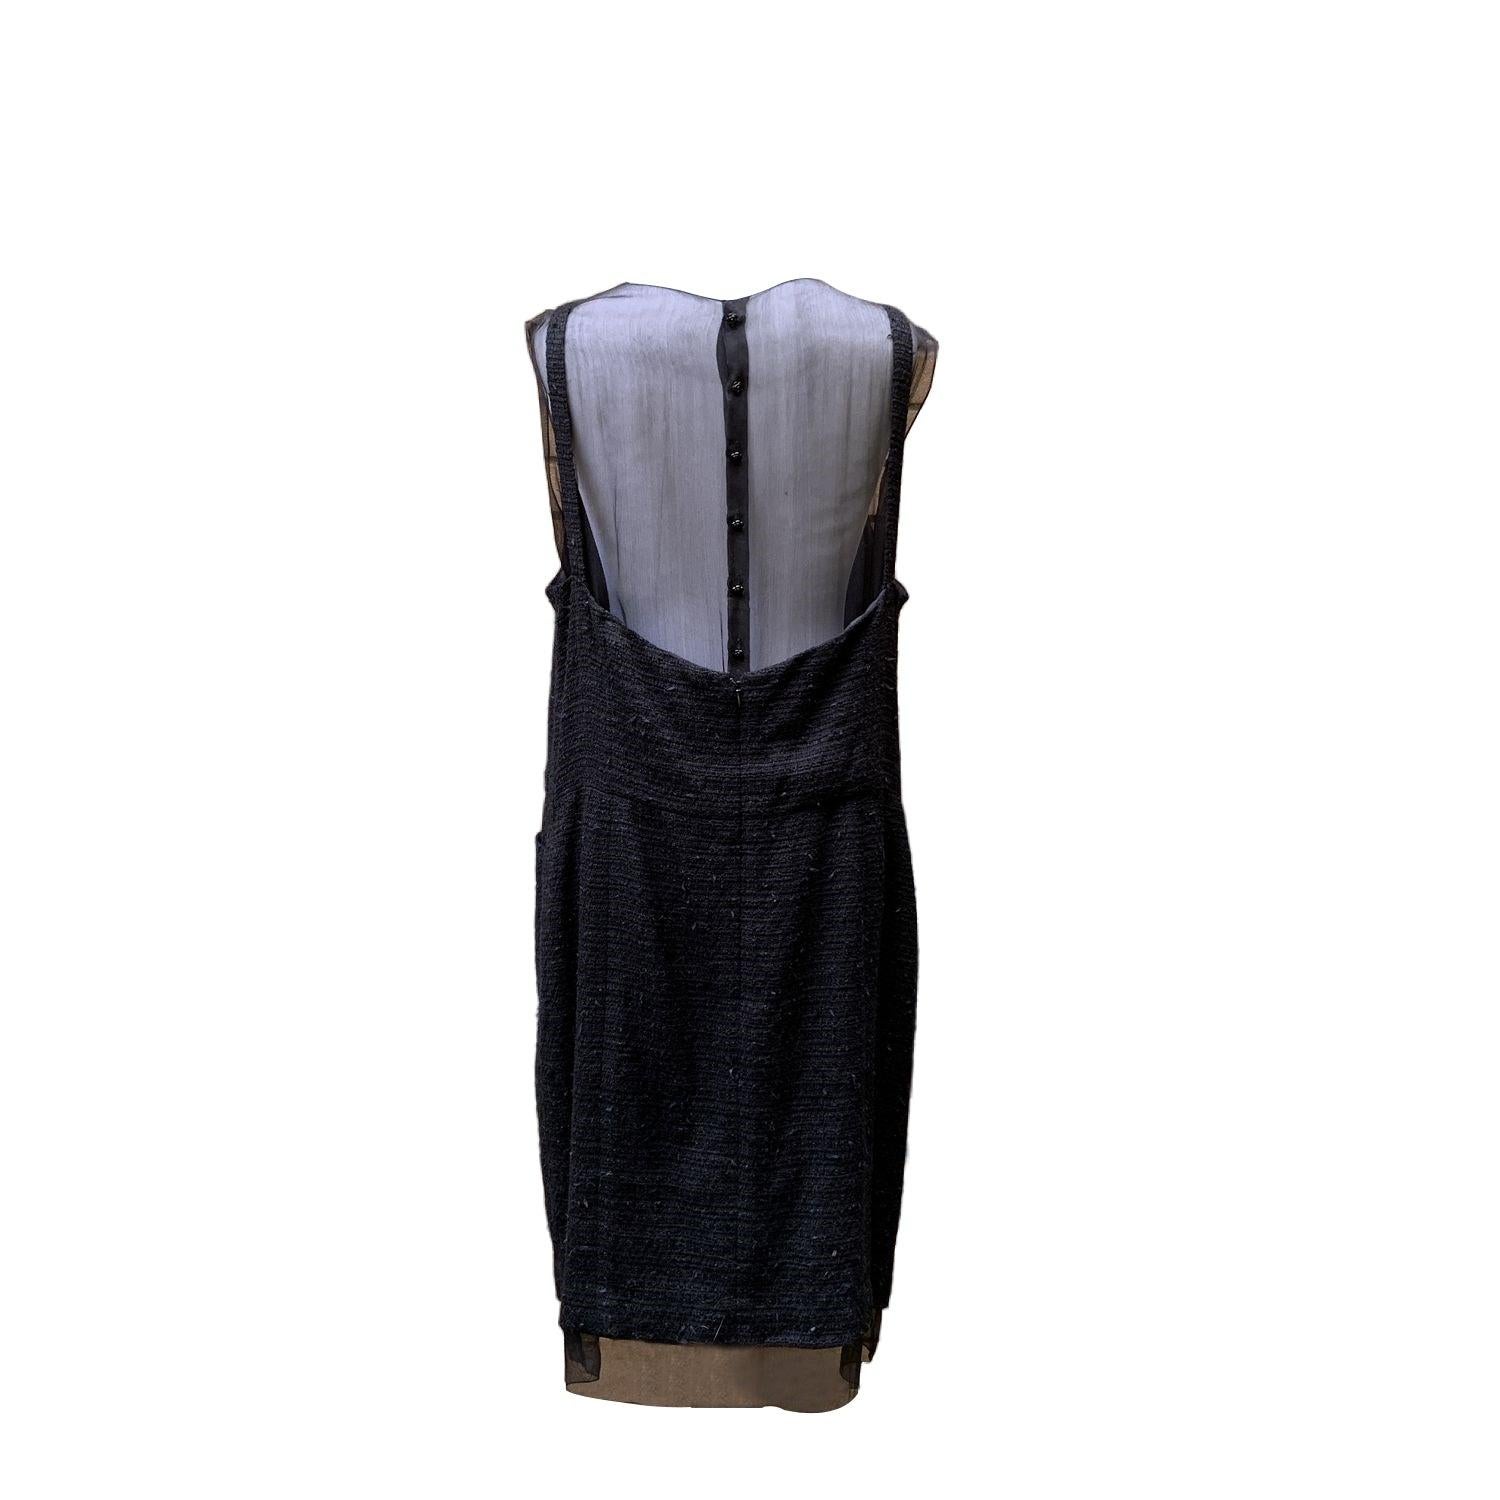 Chanel Little Black Dress Chiffon Underlay Sleeveless Size 48 FR In Good Condition For Sale In Rome, Rome